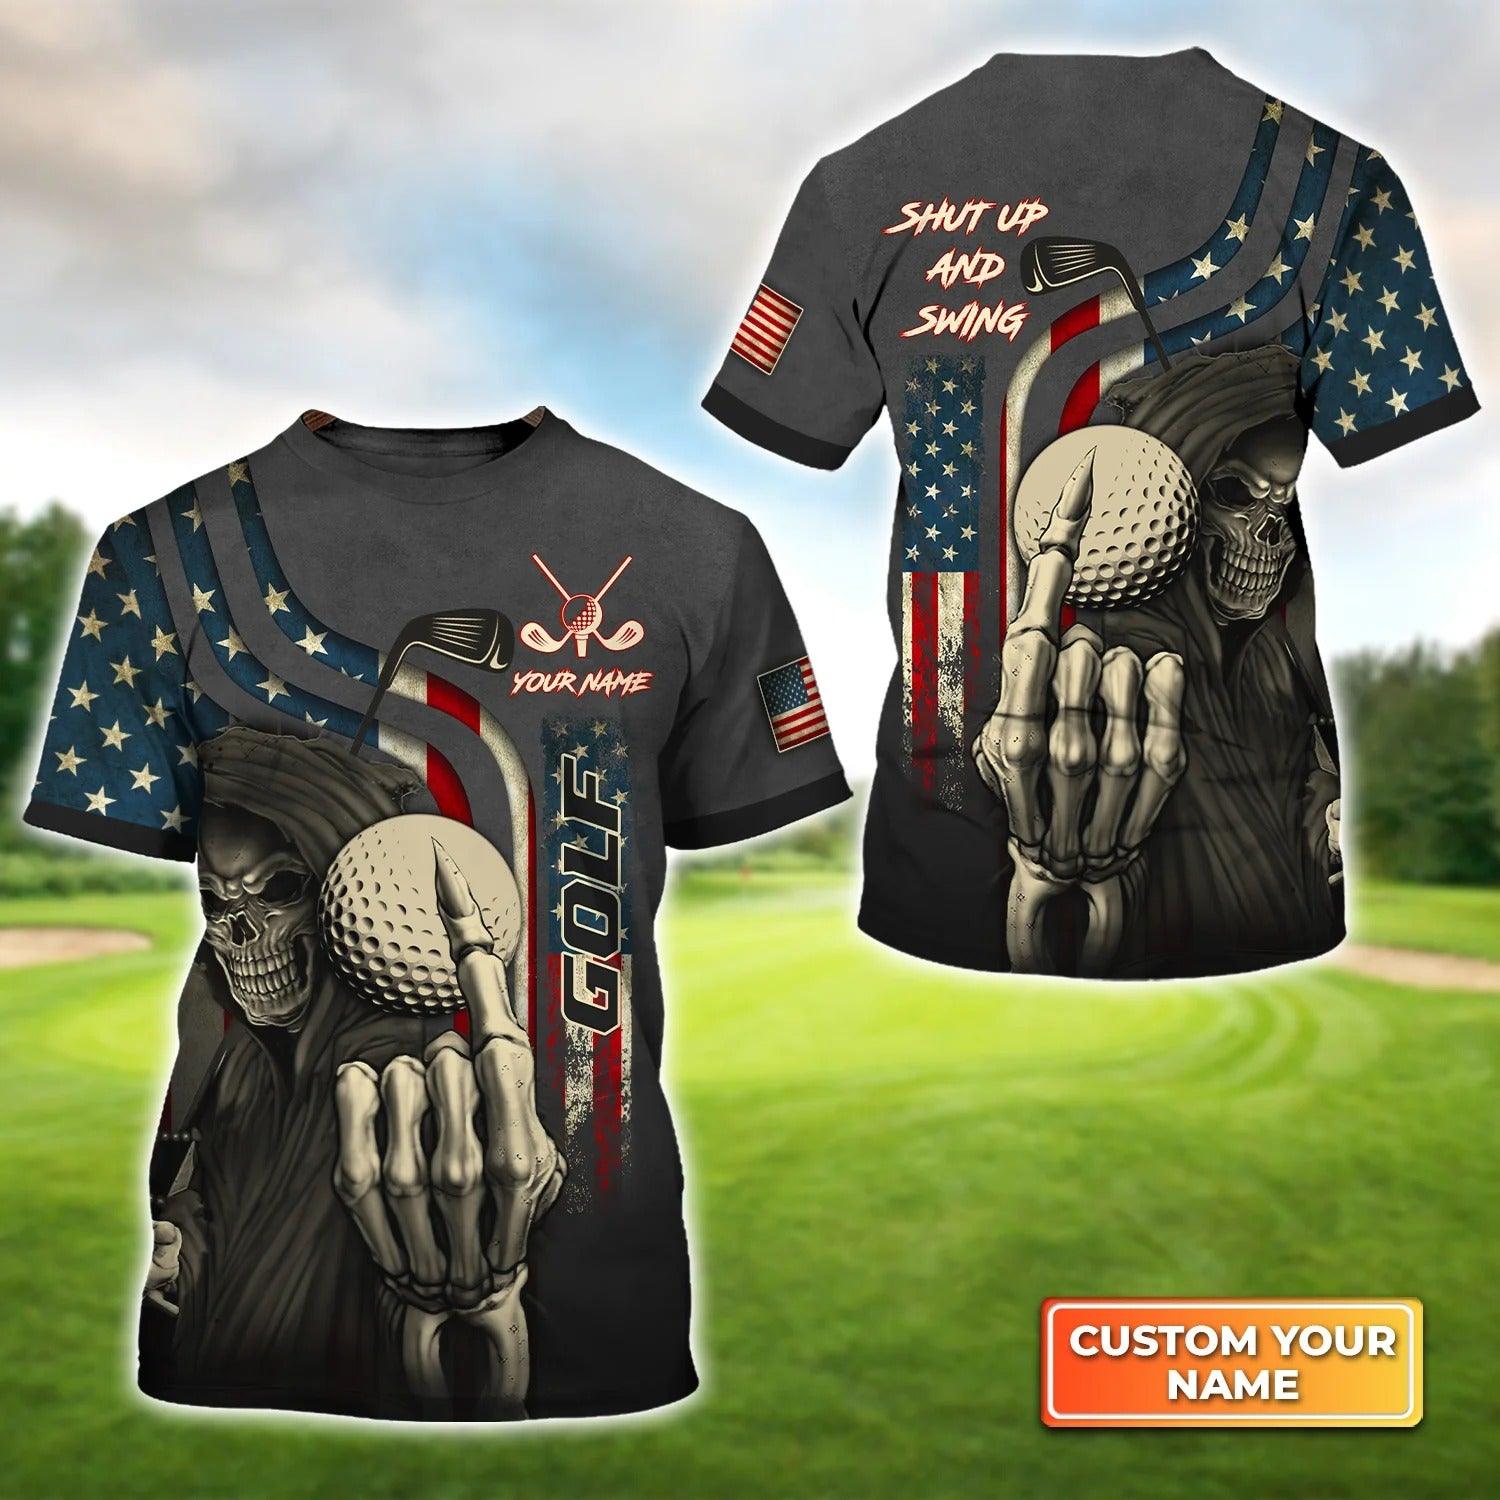 Customized Golf T Shirt, Personalized Name America Flag Skull Shut Up And Swing T Shirt For Golf Lovers - Perfect Gift For Golfer, Friend, Family - Amzanimalsgift